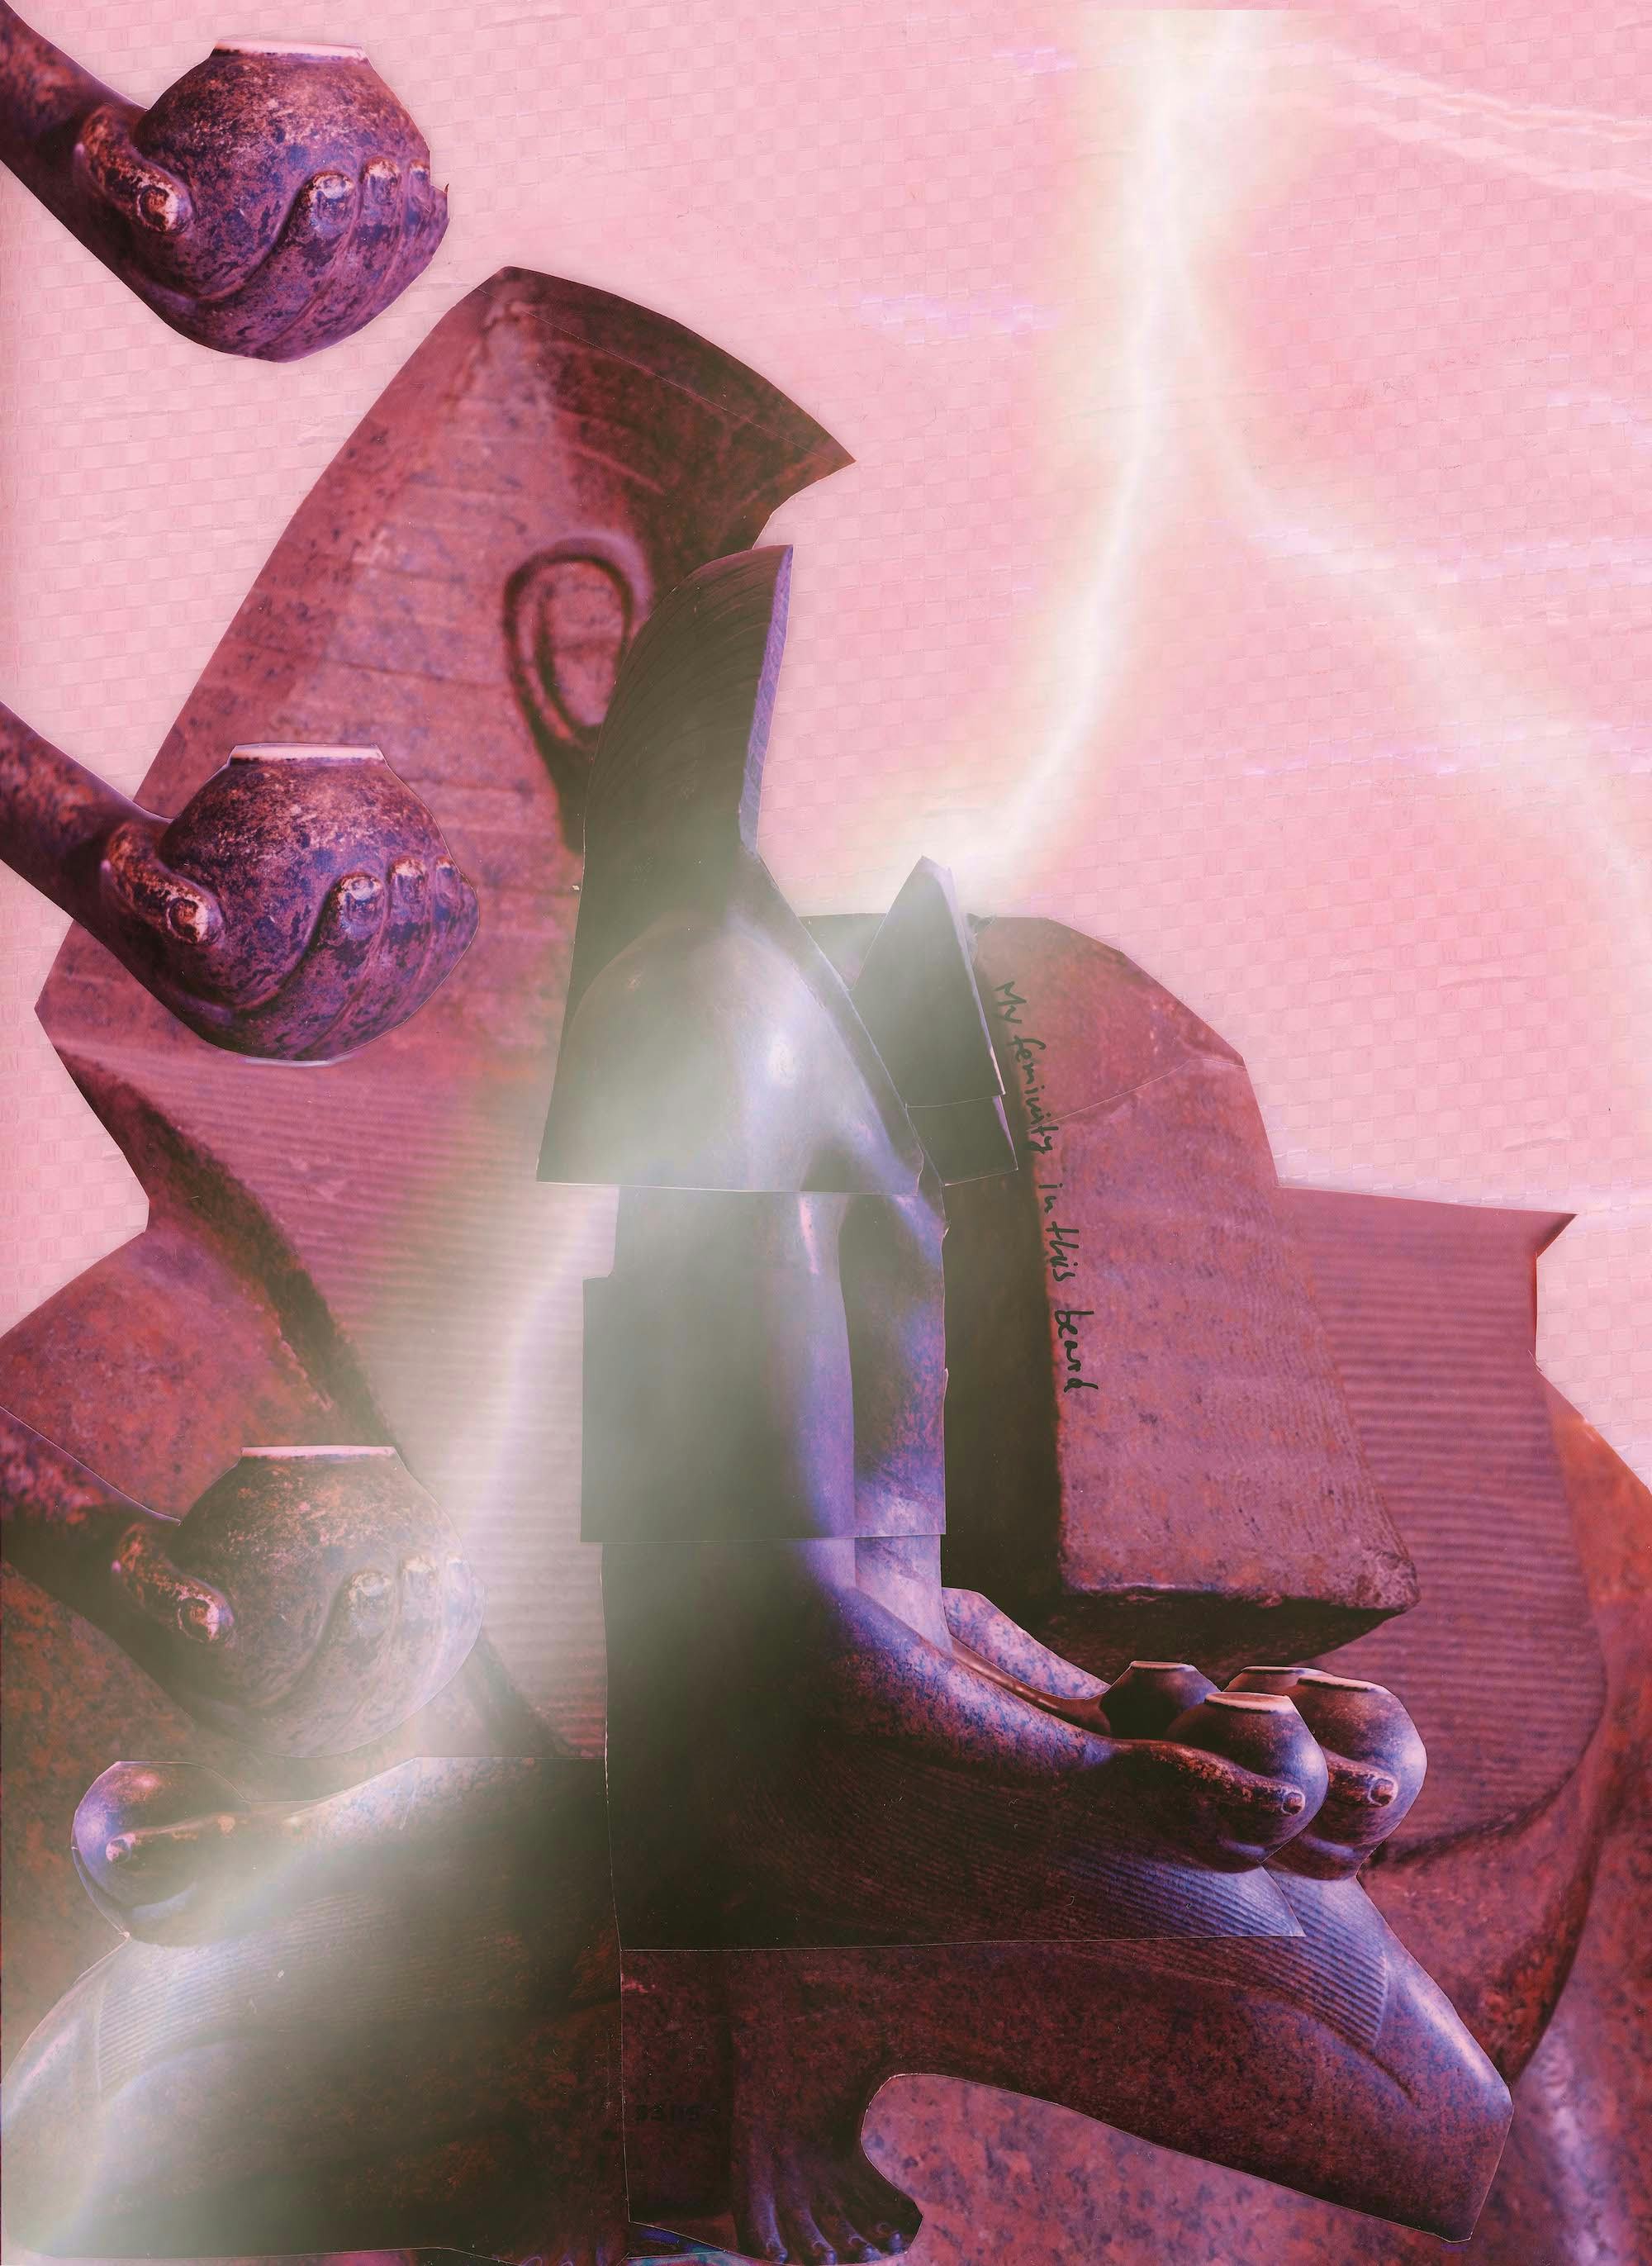 Manipulated image with pink filter of a pharaoh figure with a lightning strike in the middle. © Donja Nasseri